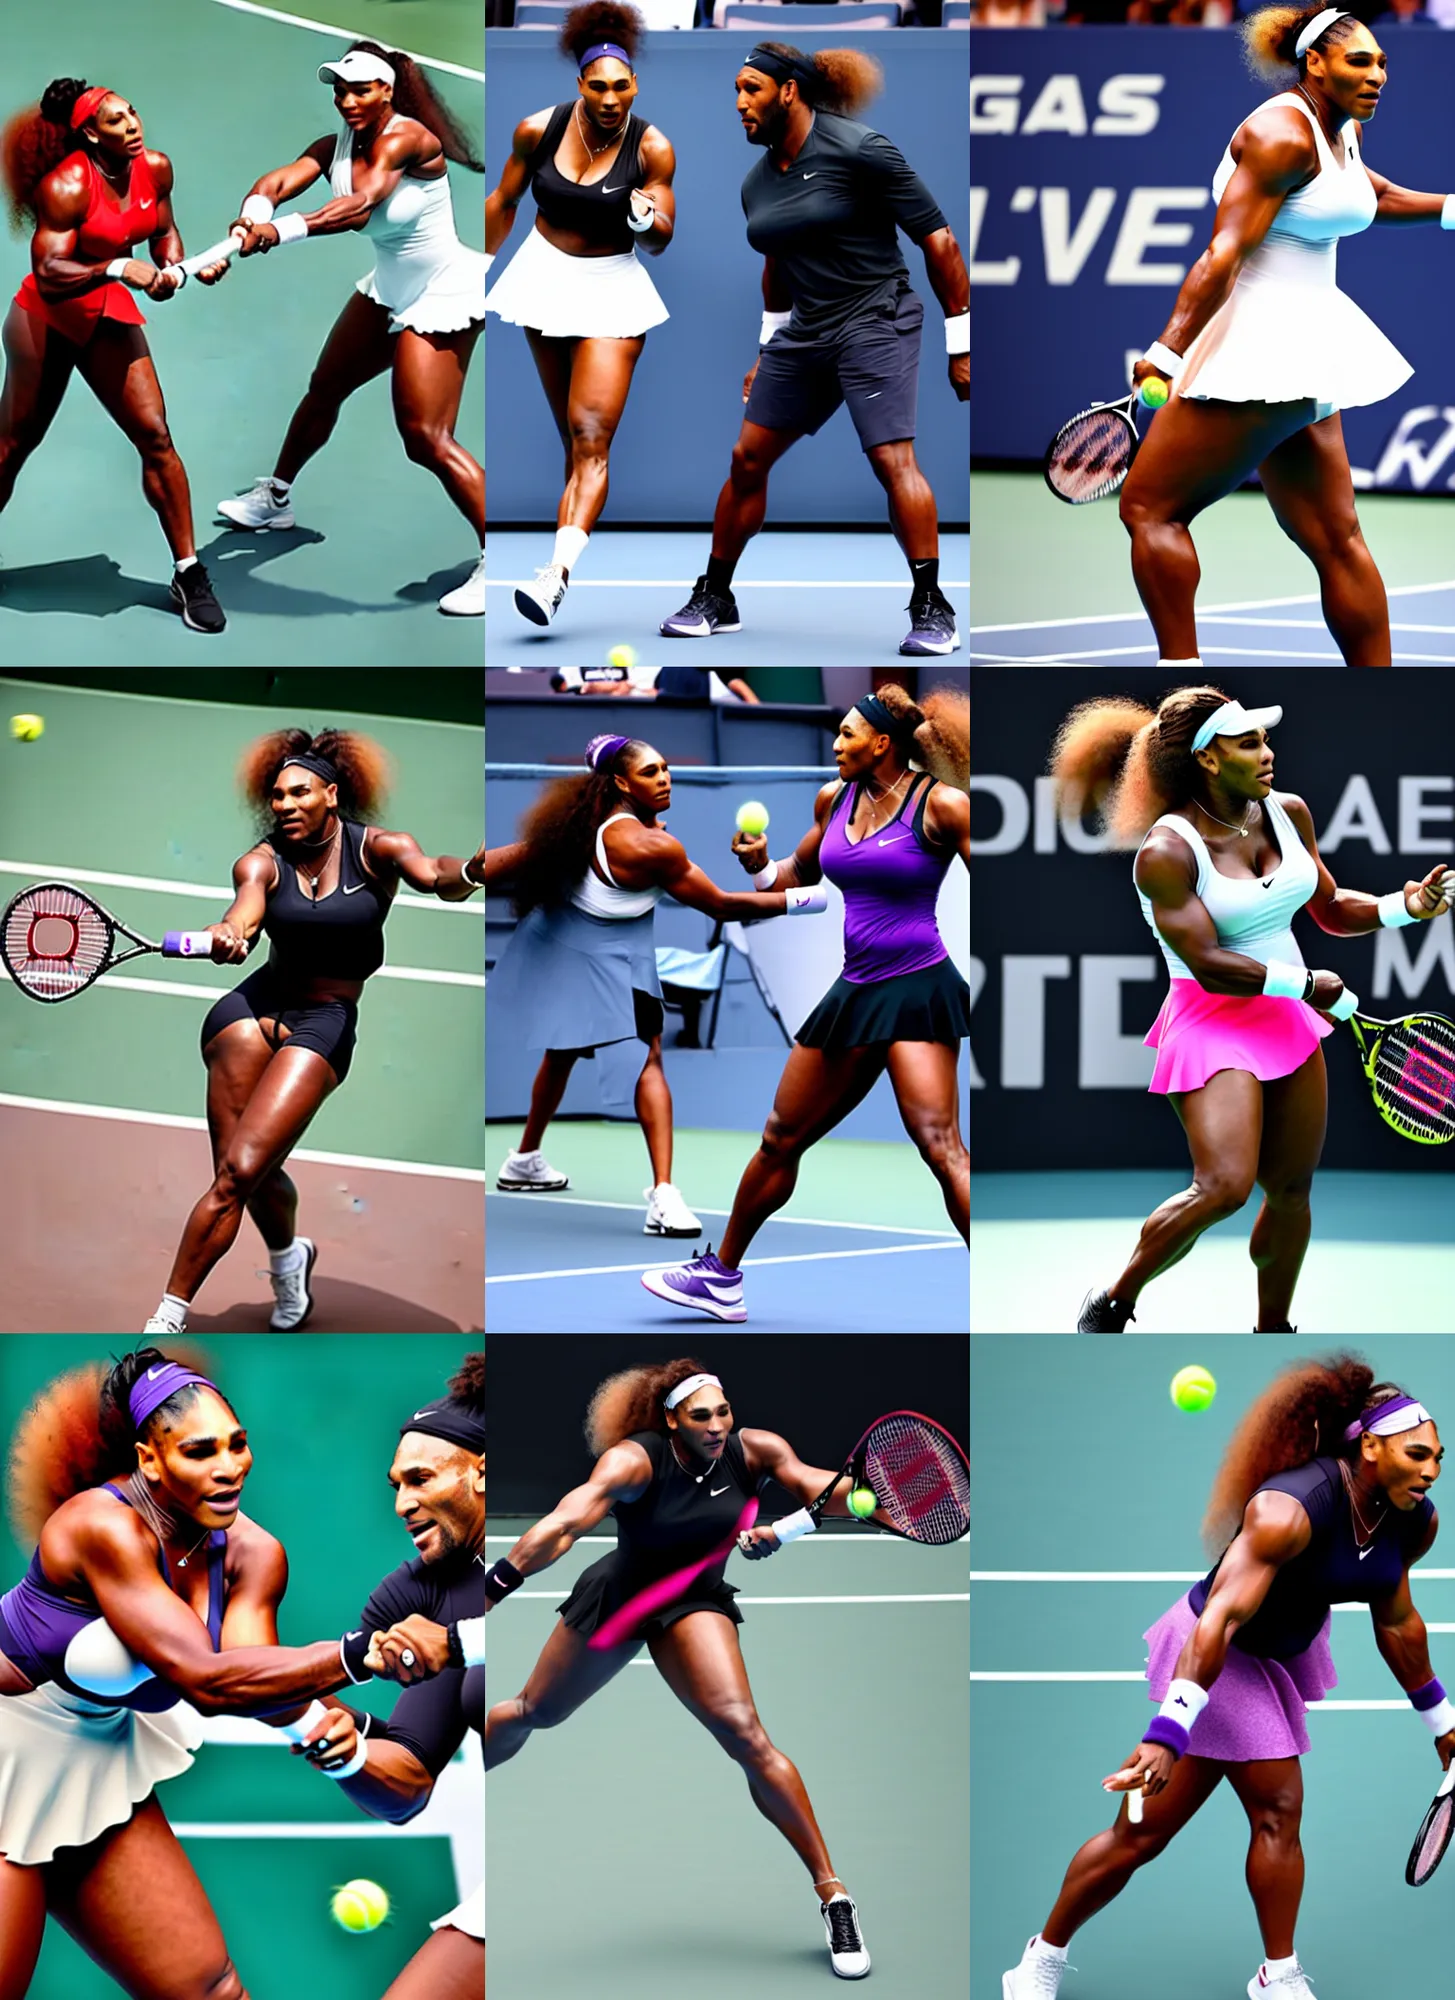 Prompt: promotional image, serena williams vs ray lewis, tennis match, showdown